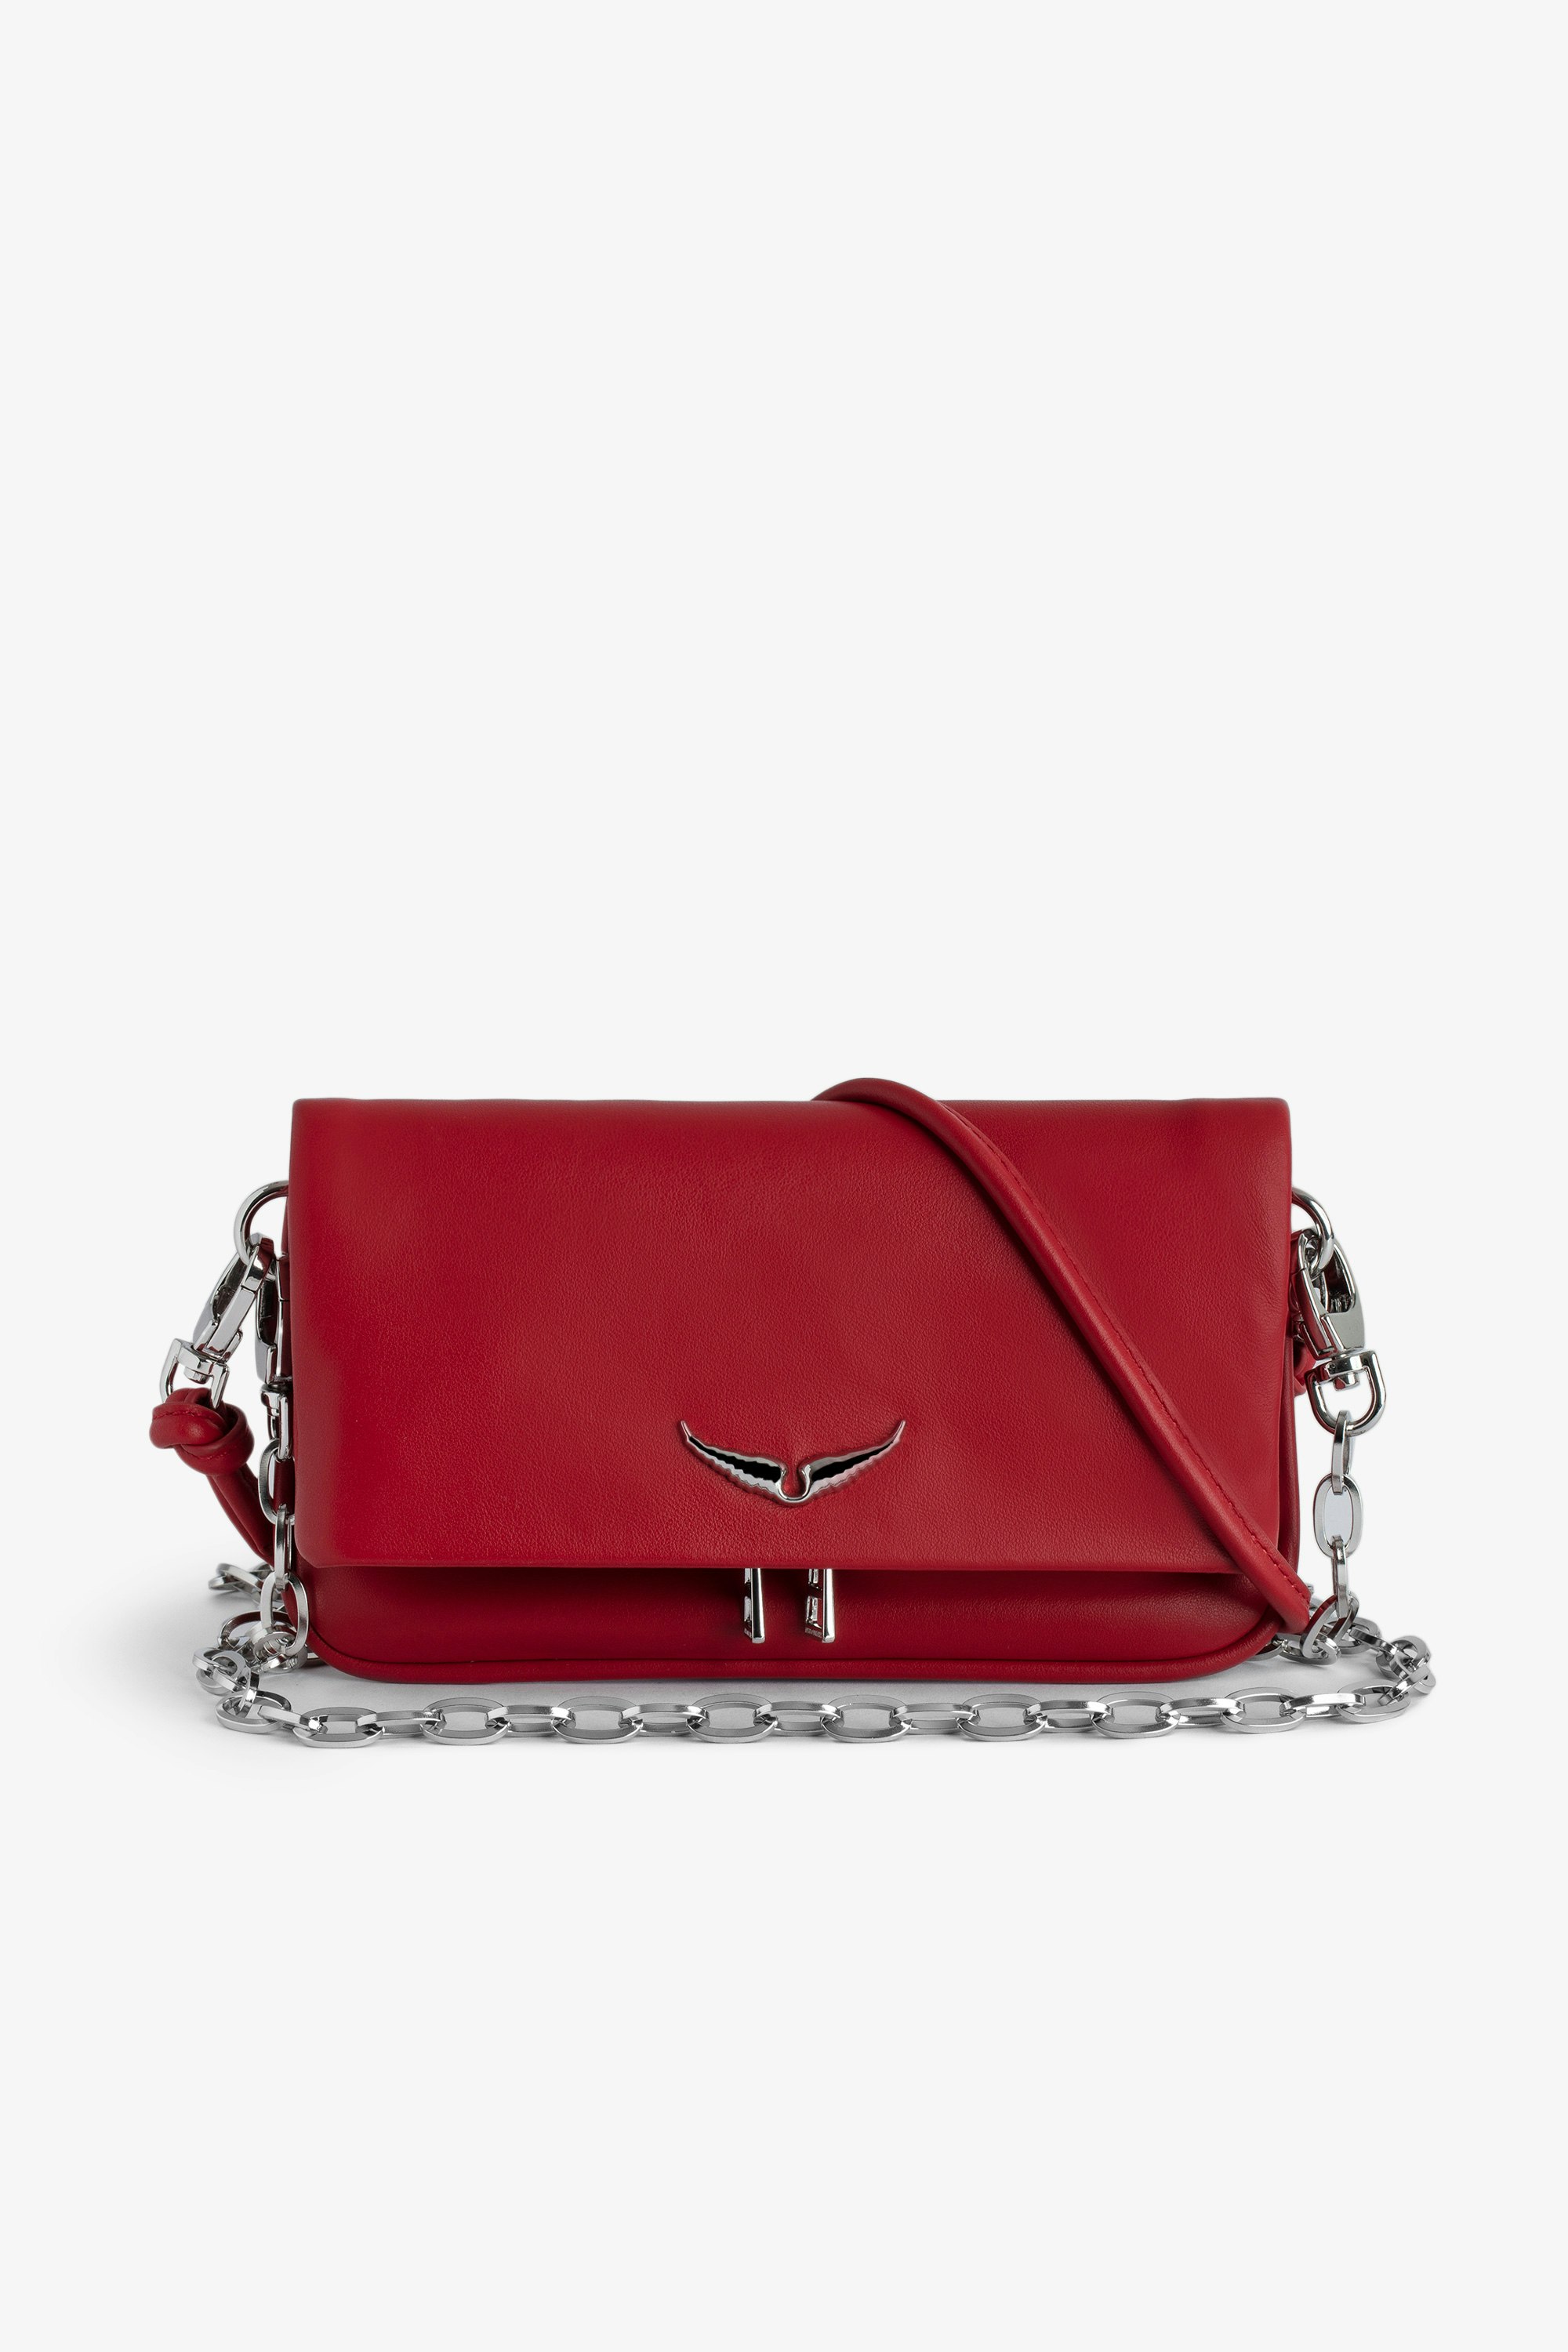 Rock Nano Eternal Clutch - Small red smooth leather clutch with tied handle and chain.